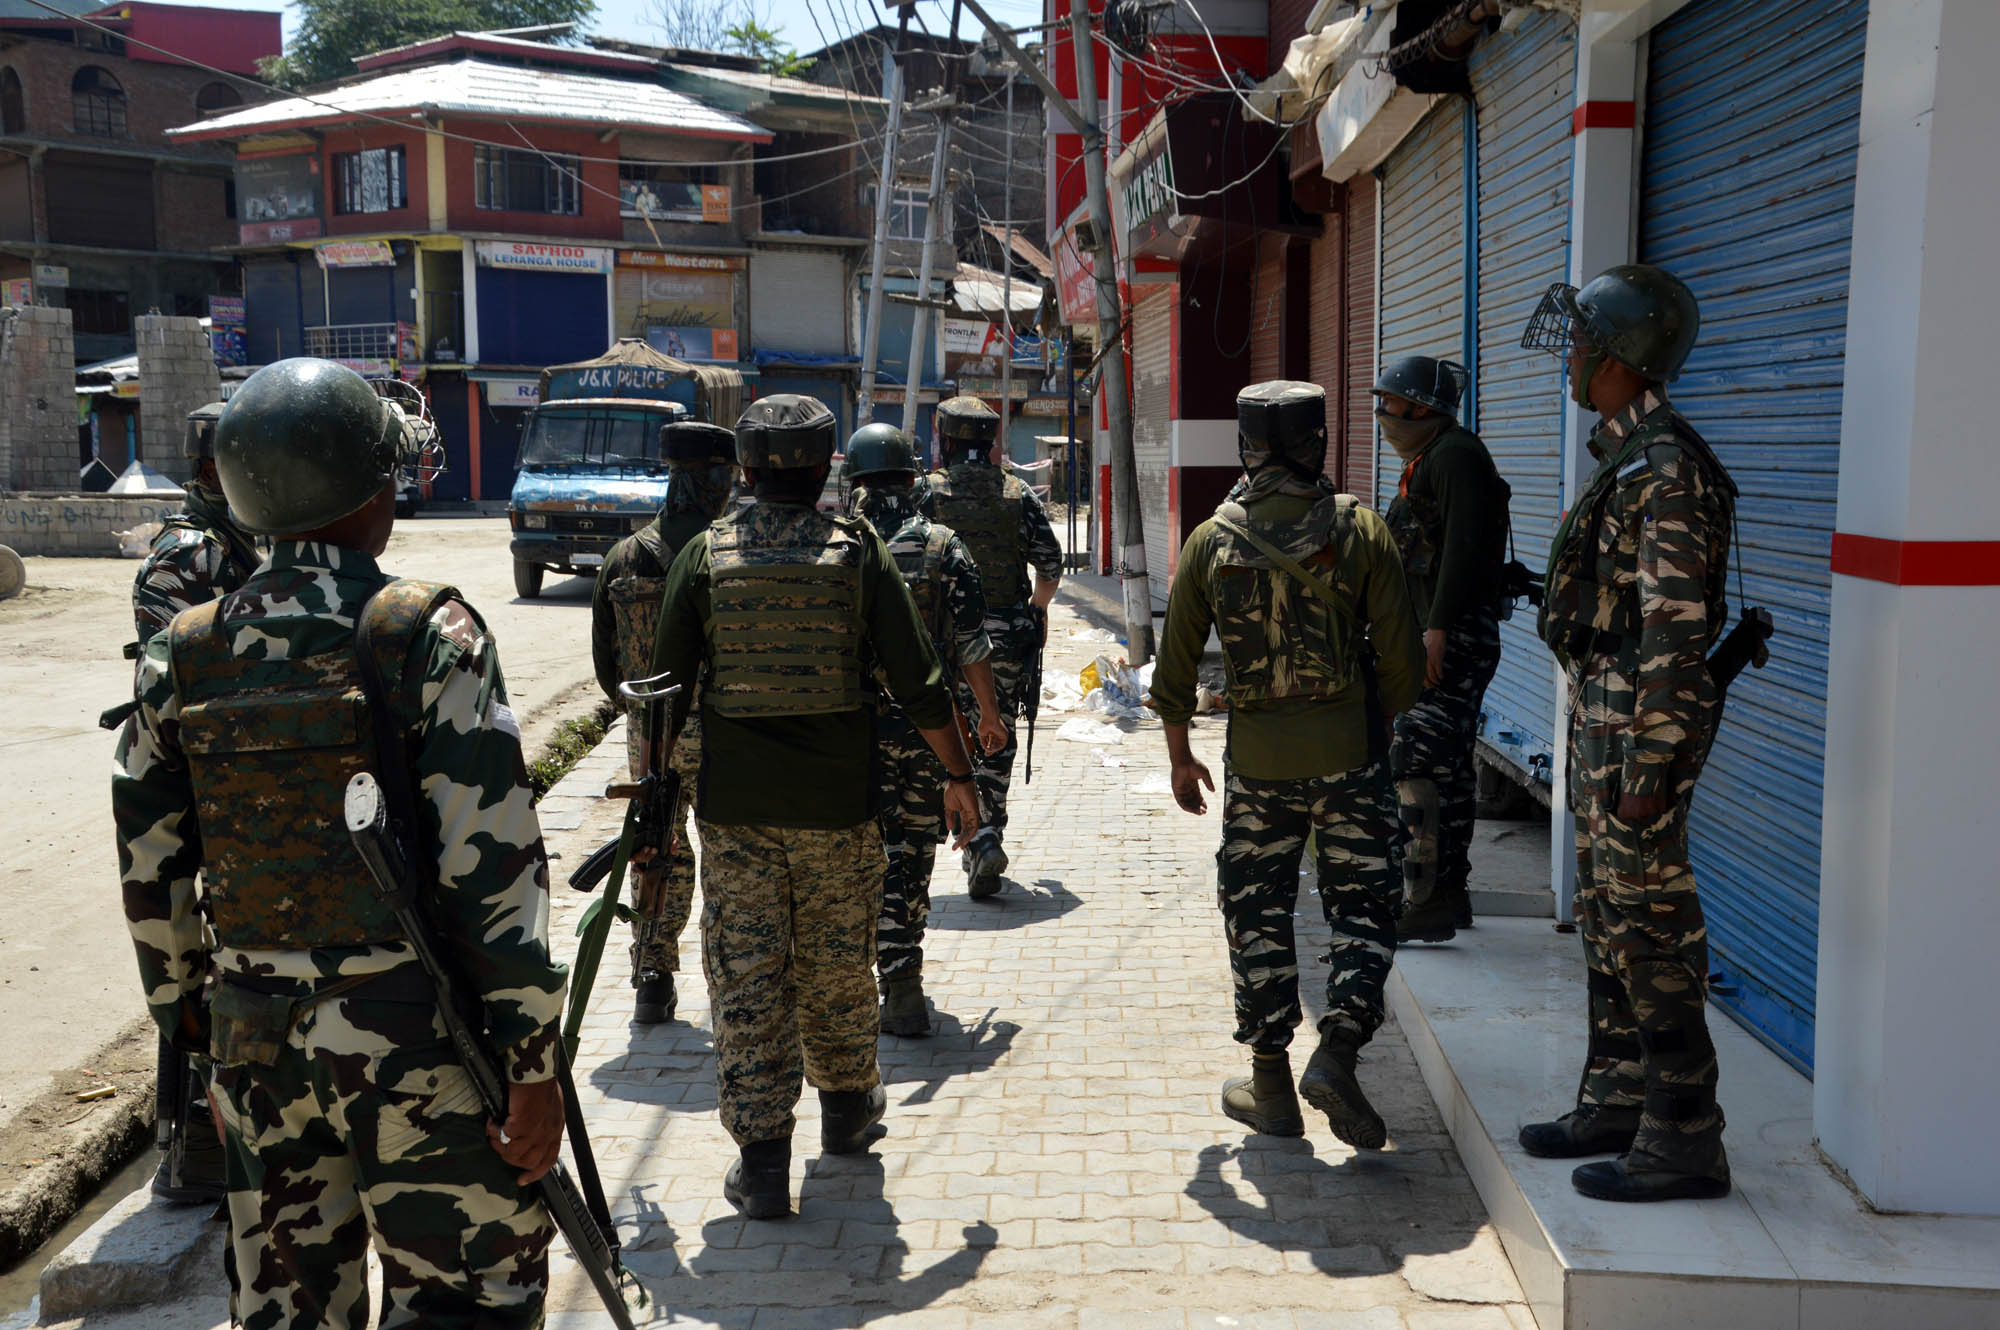 After Police, Army, now CRPF seek details of house owners, family in Kashmir